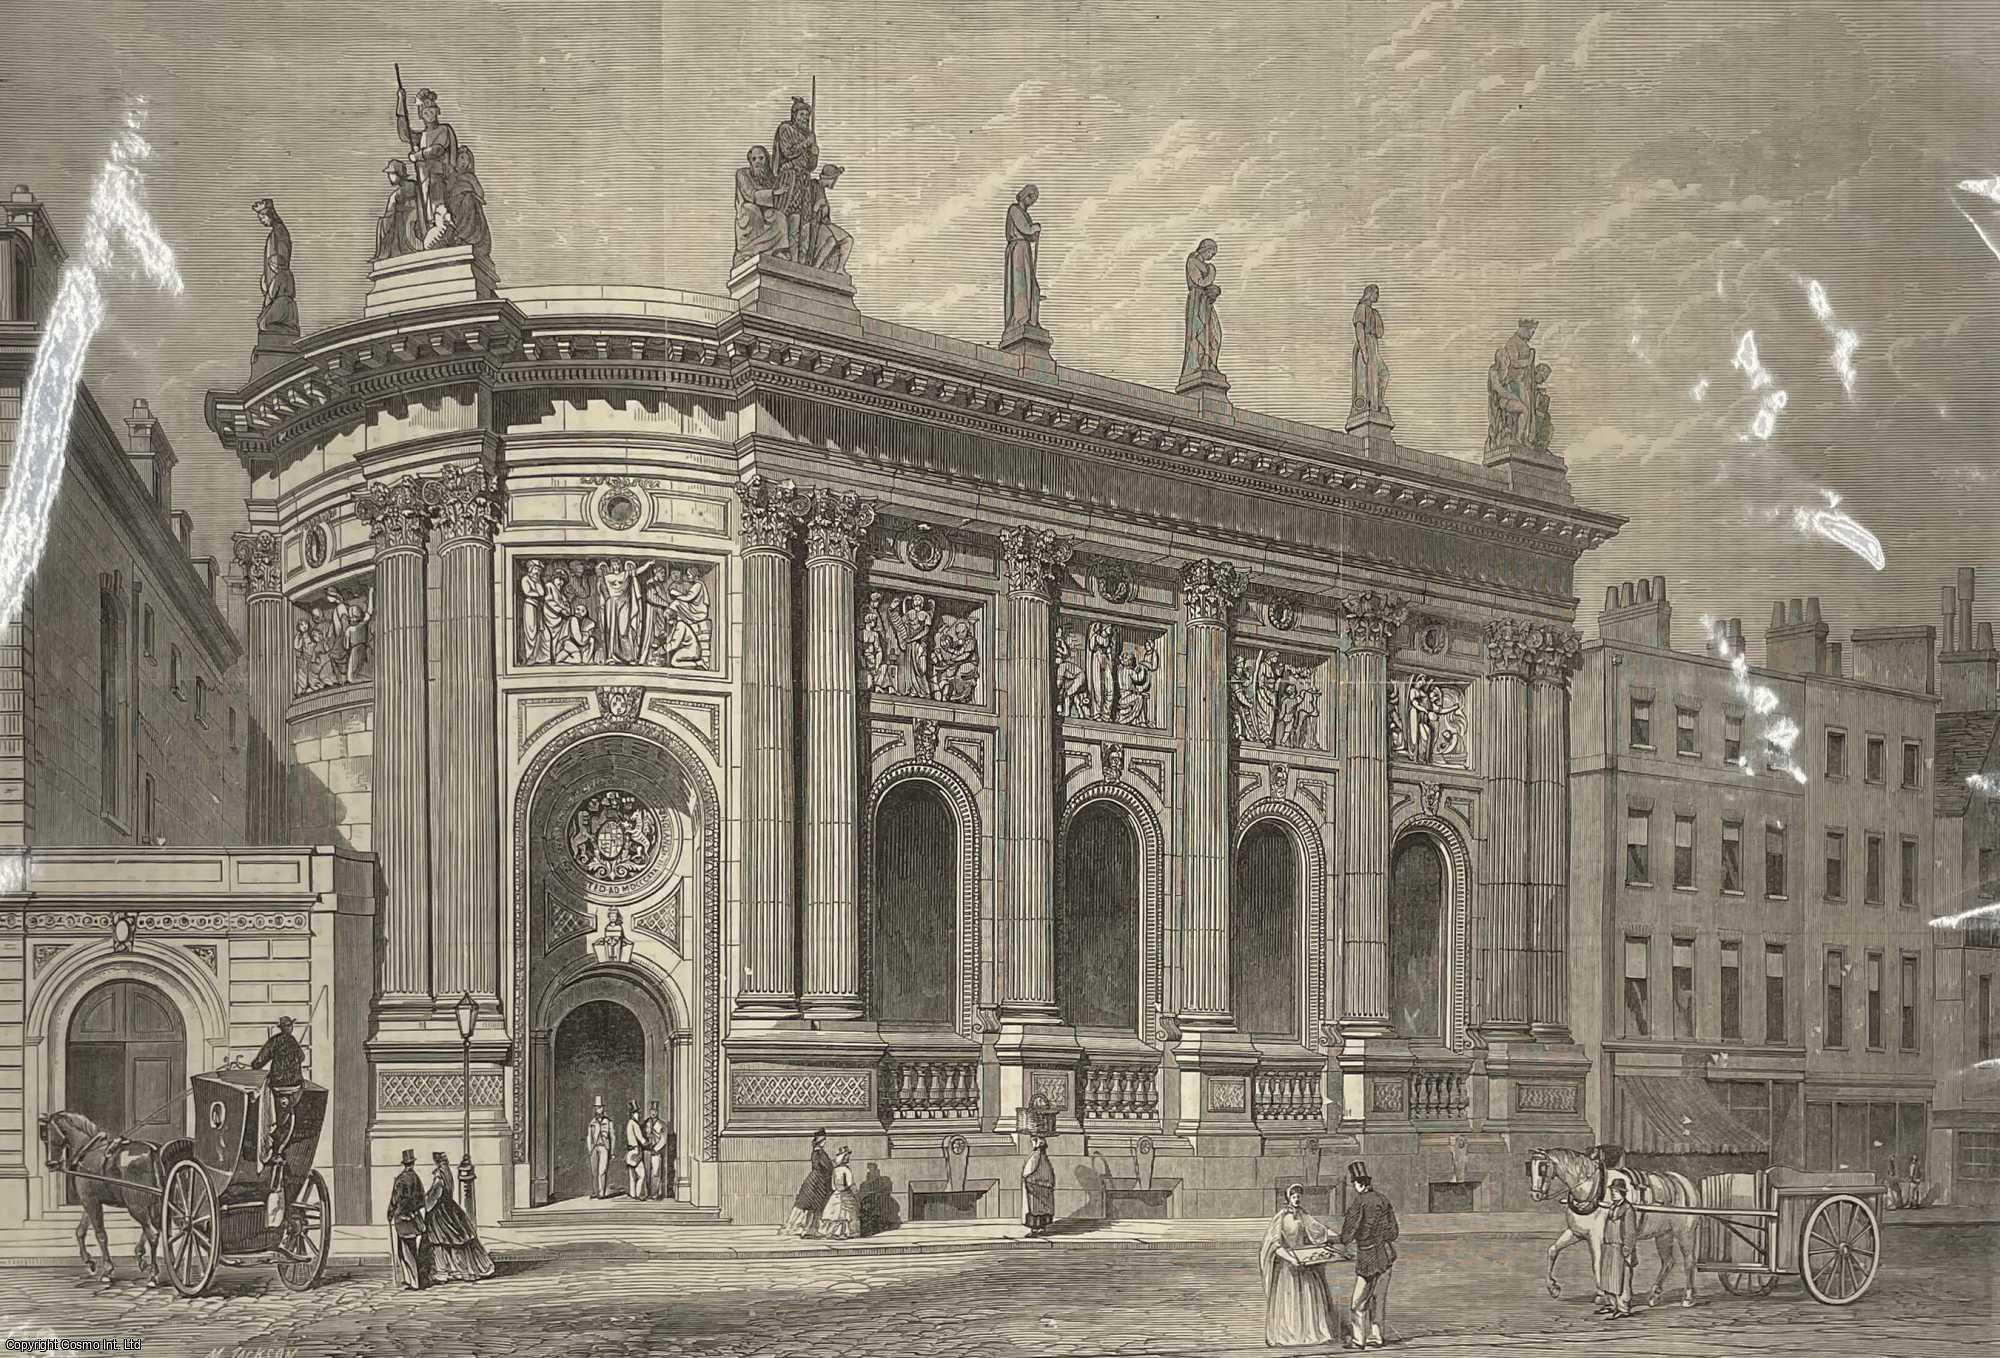 BANKING - The National and Provincial Bank of England, at the Corner of Threadneedle Street and Bishopsgate Street. An original print from the Illustrated London News, 1866.